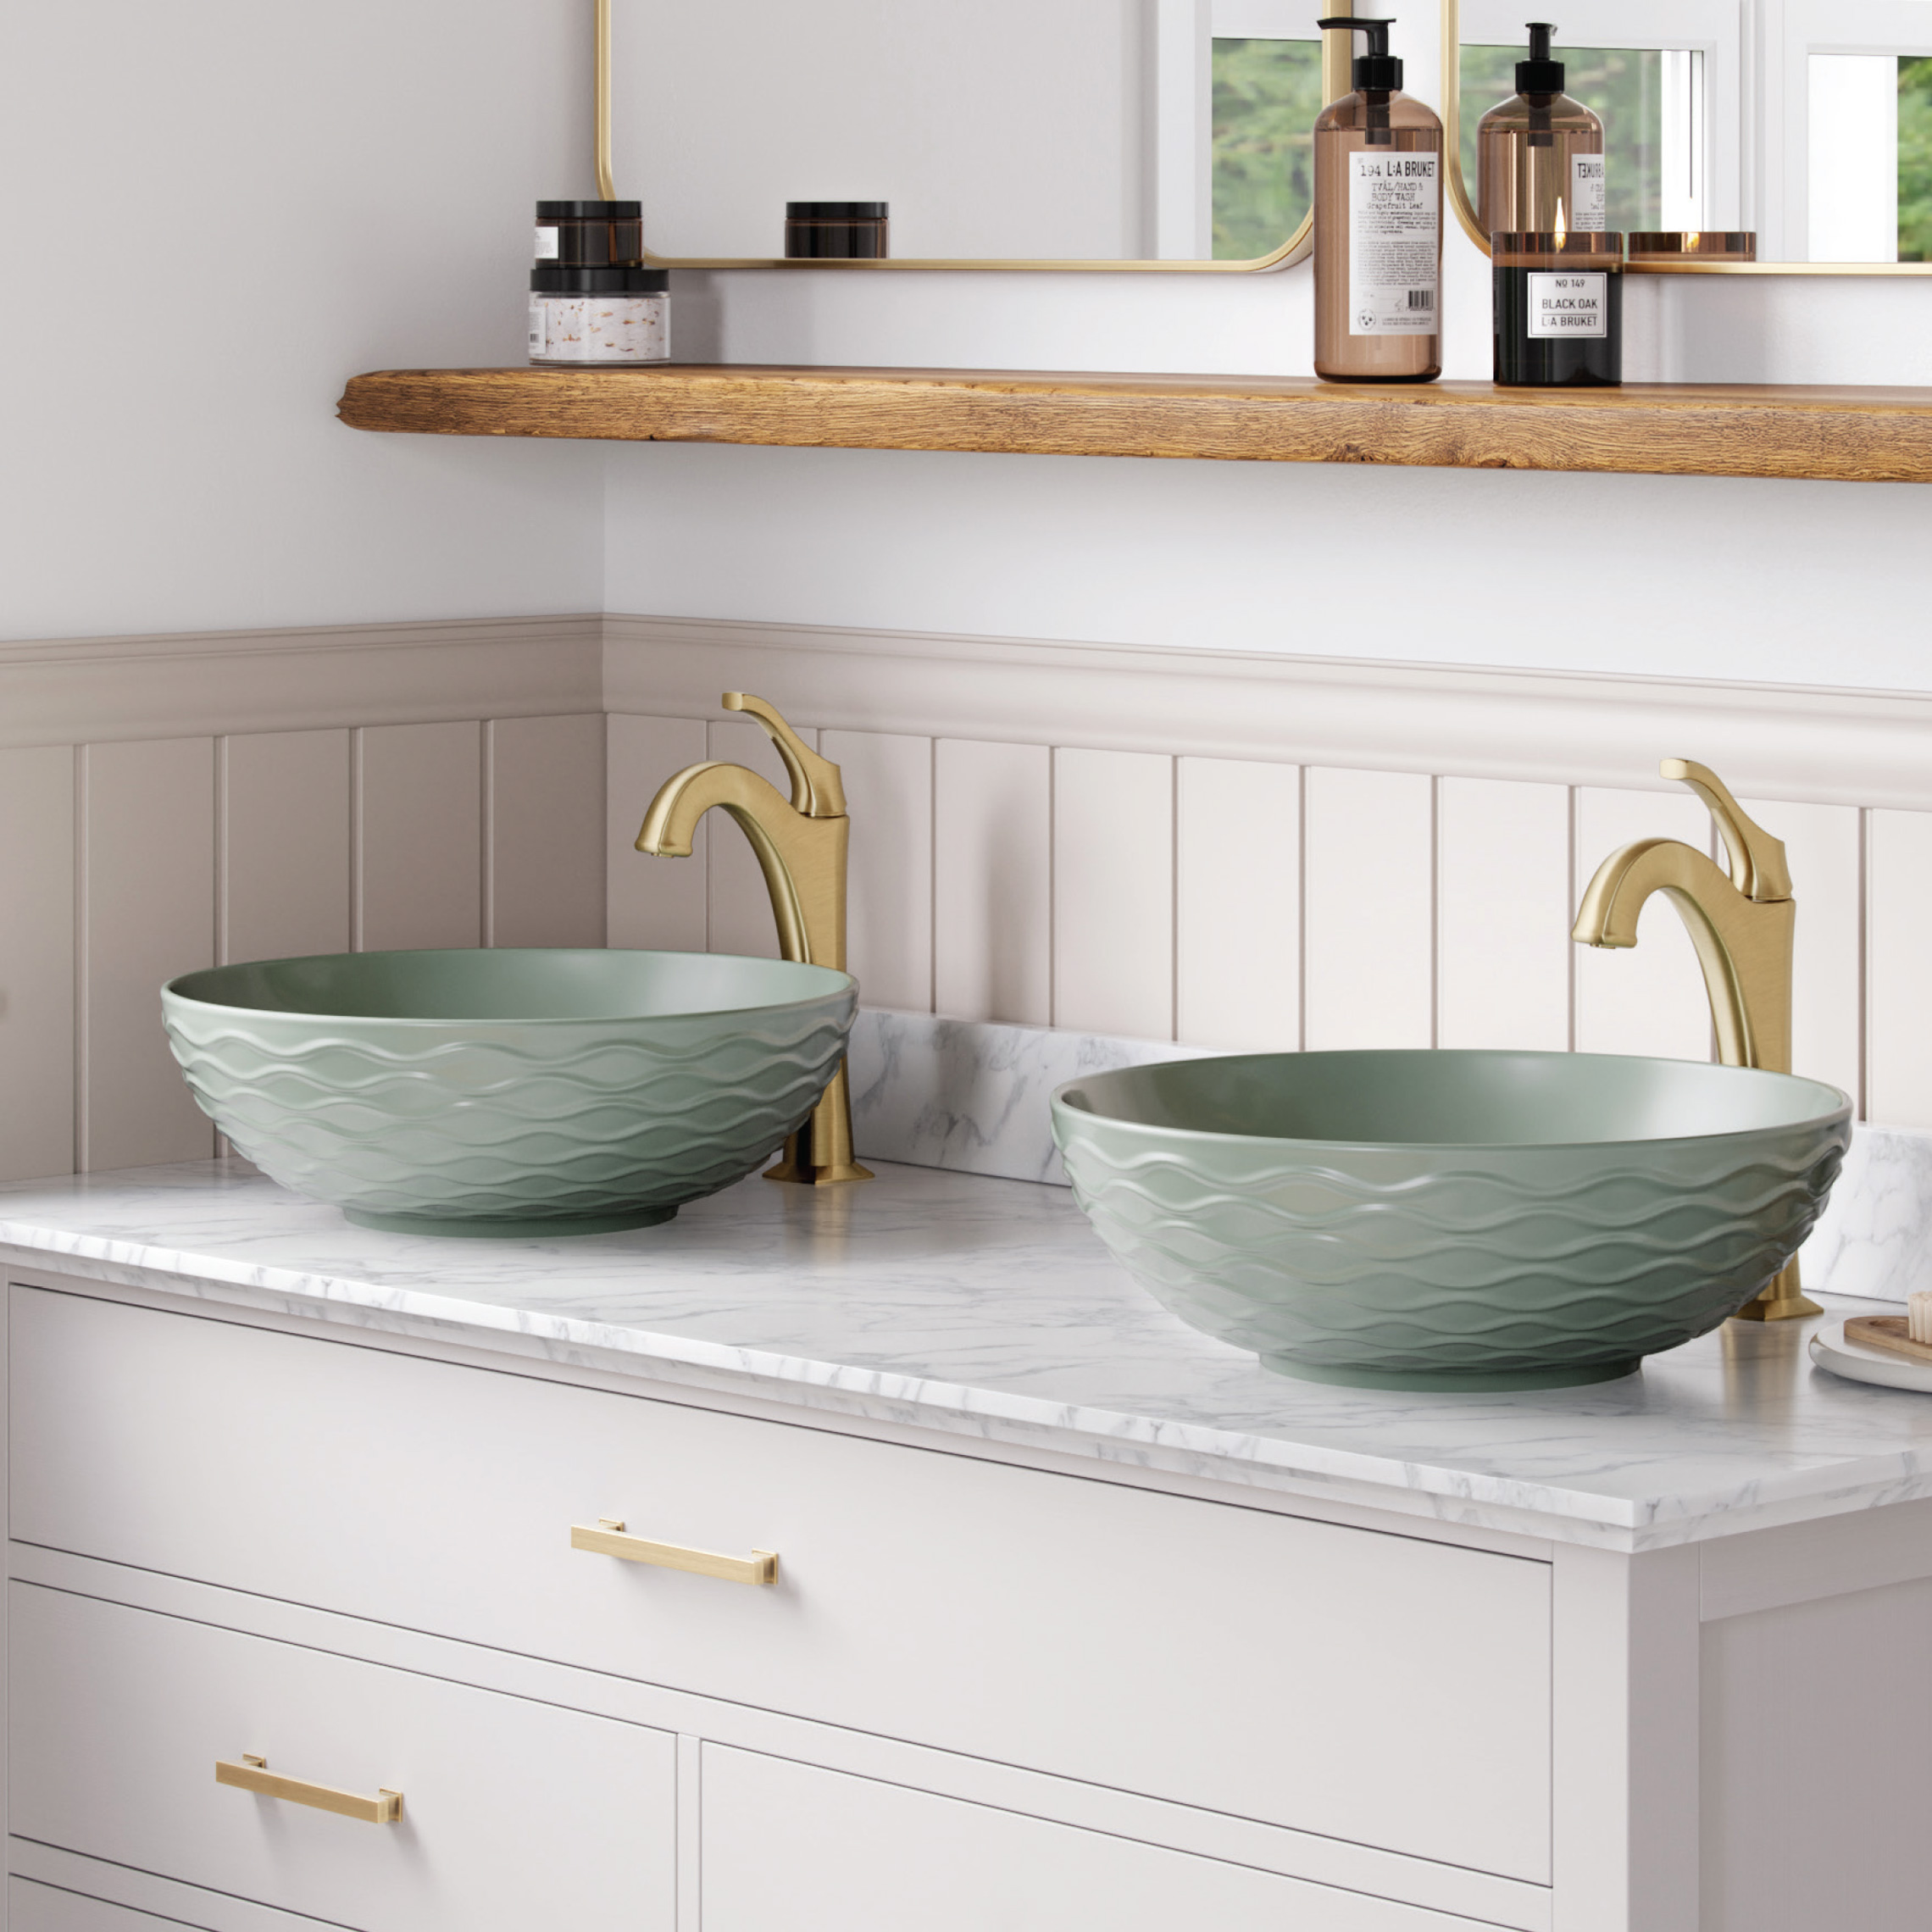 sink options from Kraus